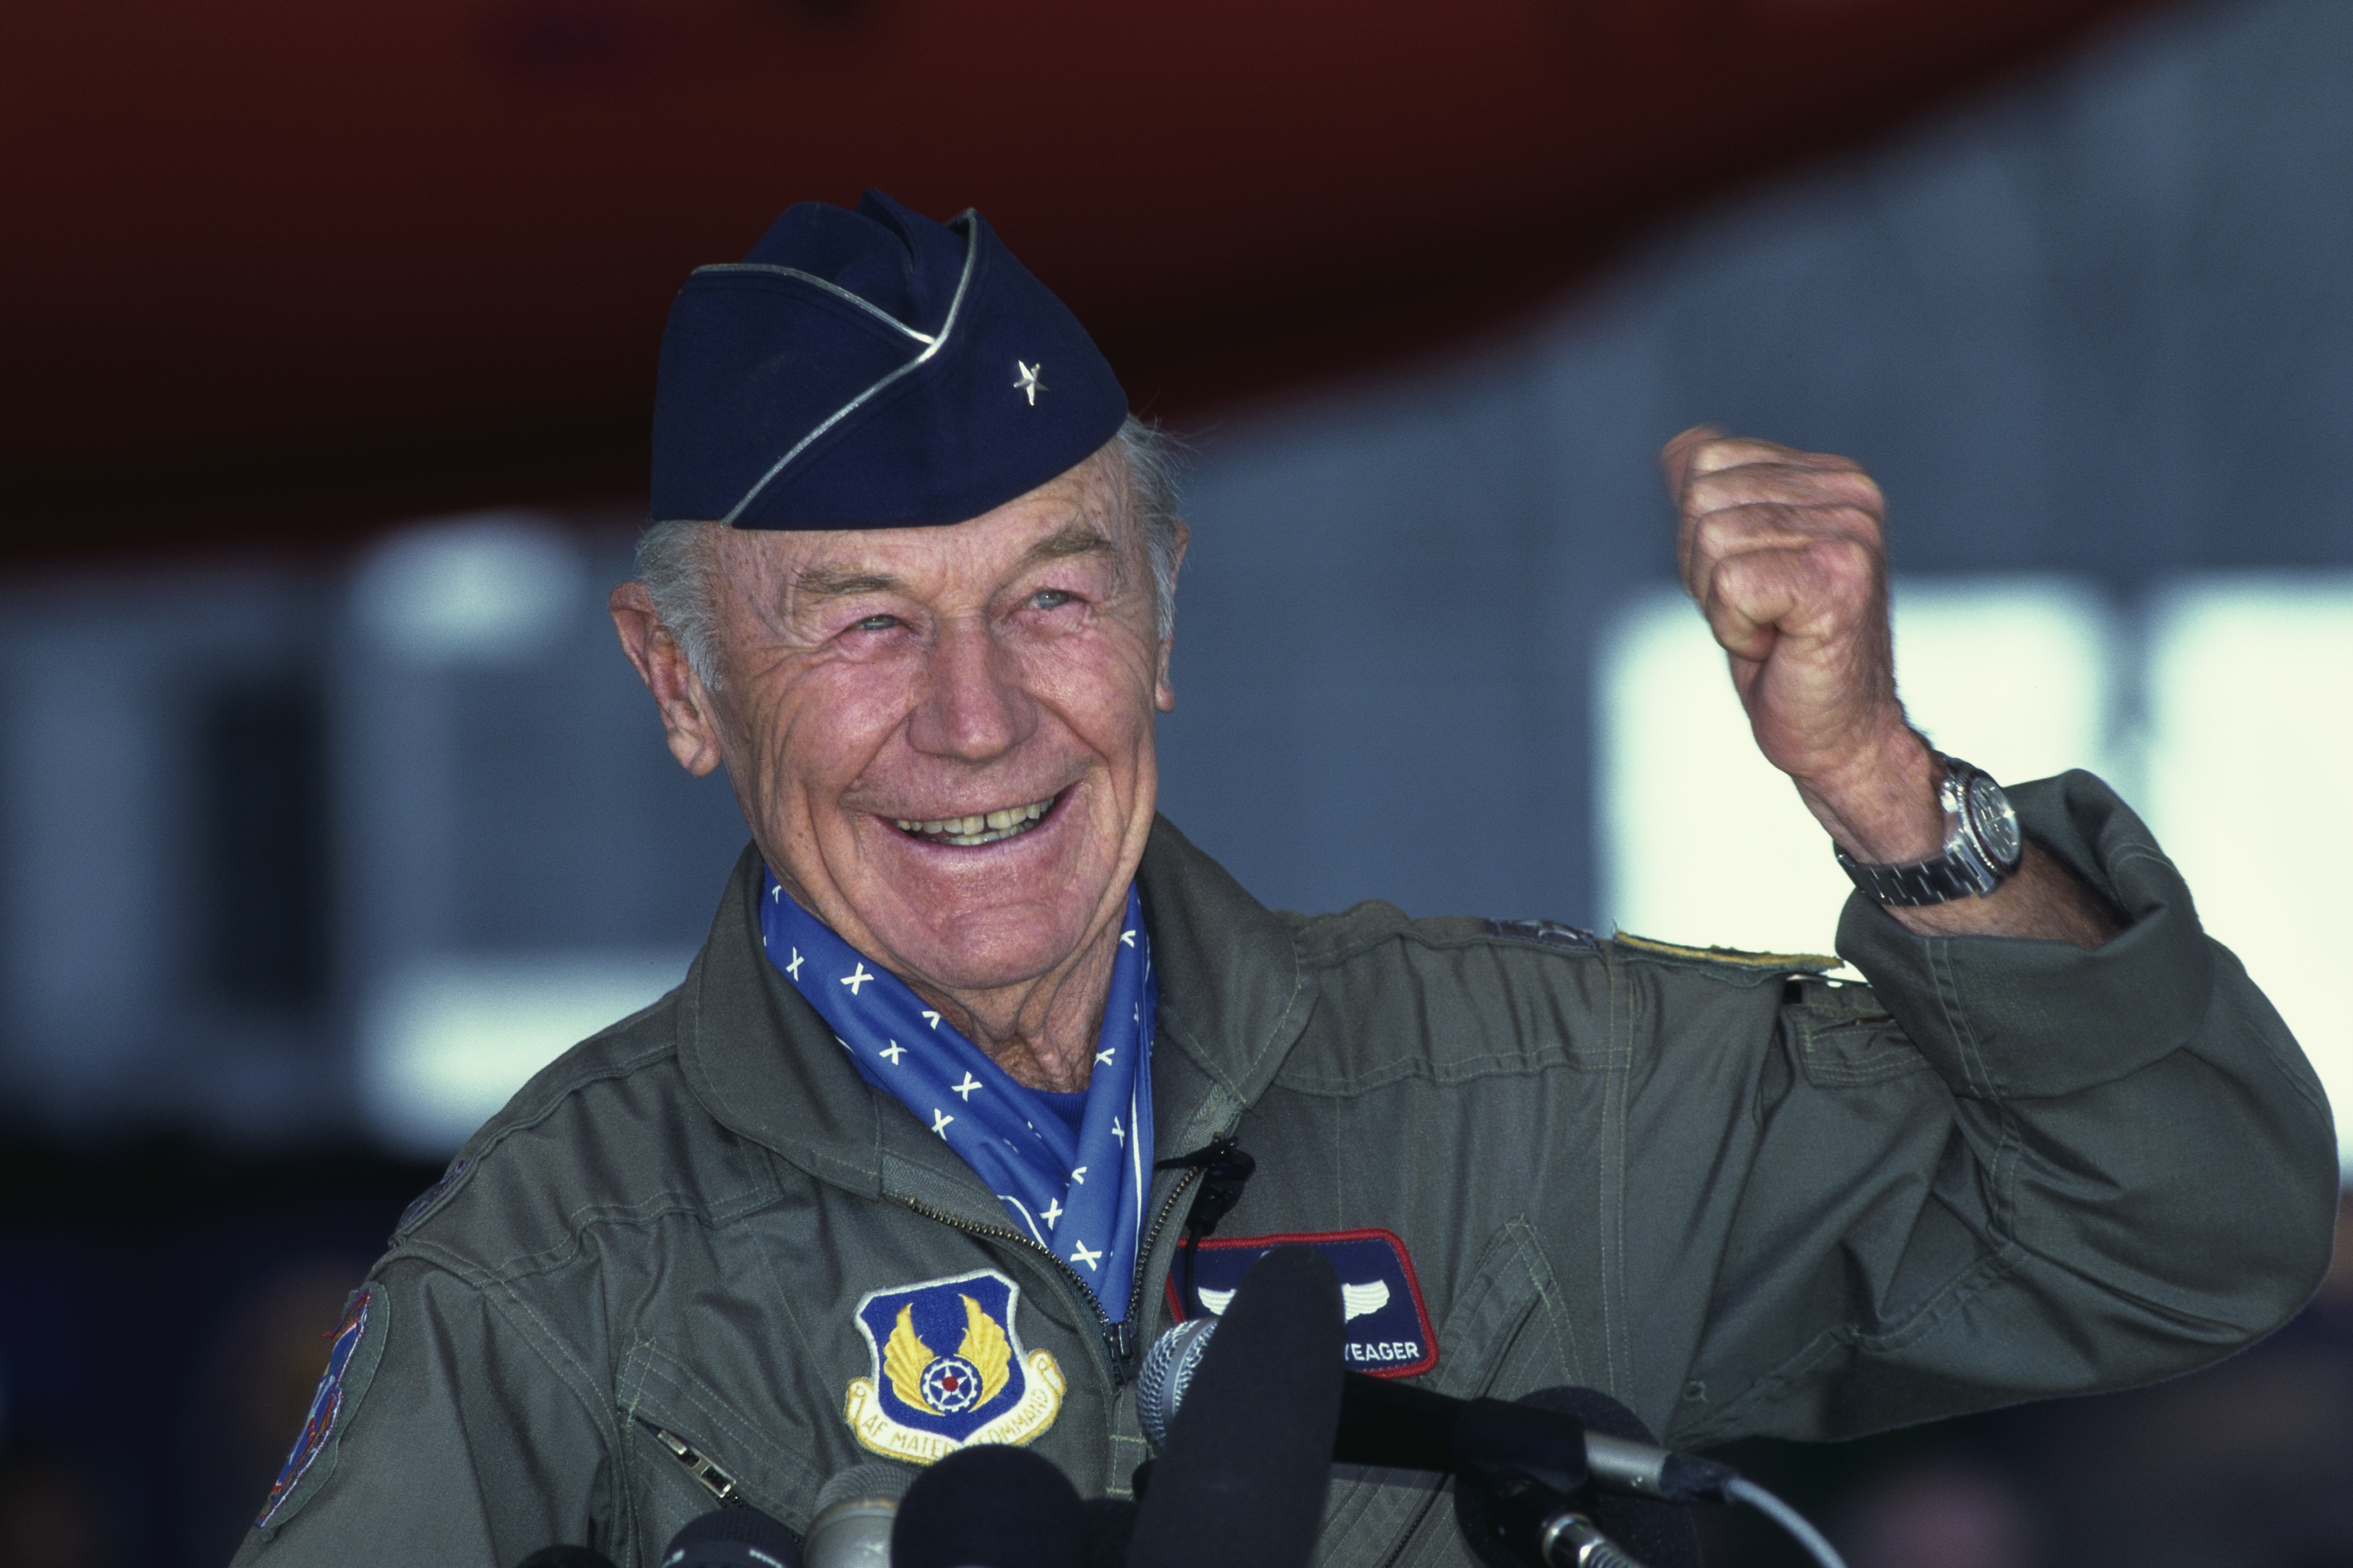 Chuck Yeager during a 1997 press conference at Edwards Air Force Base during the 50th anniversary celebration of his October 14, 1947 Bell X-1 flight, in which he became the first man to break the sound barrier. (Corbis/Getty Images)